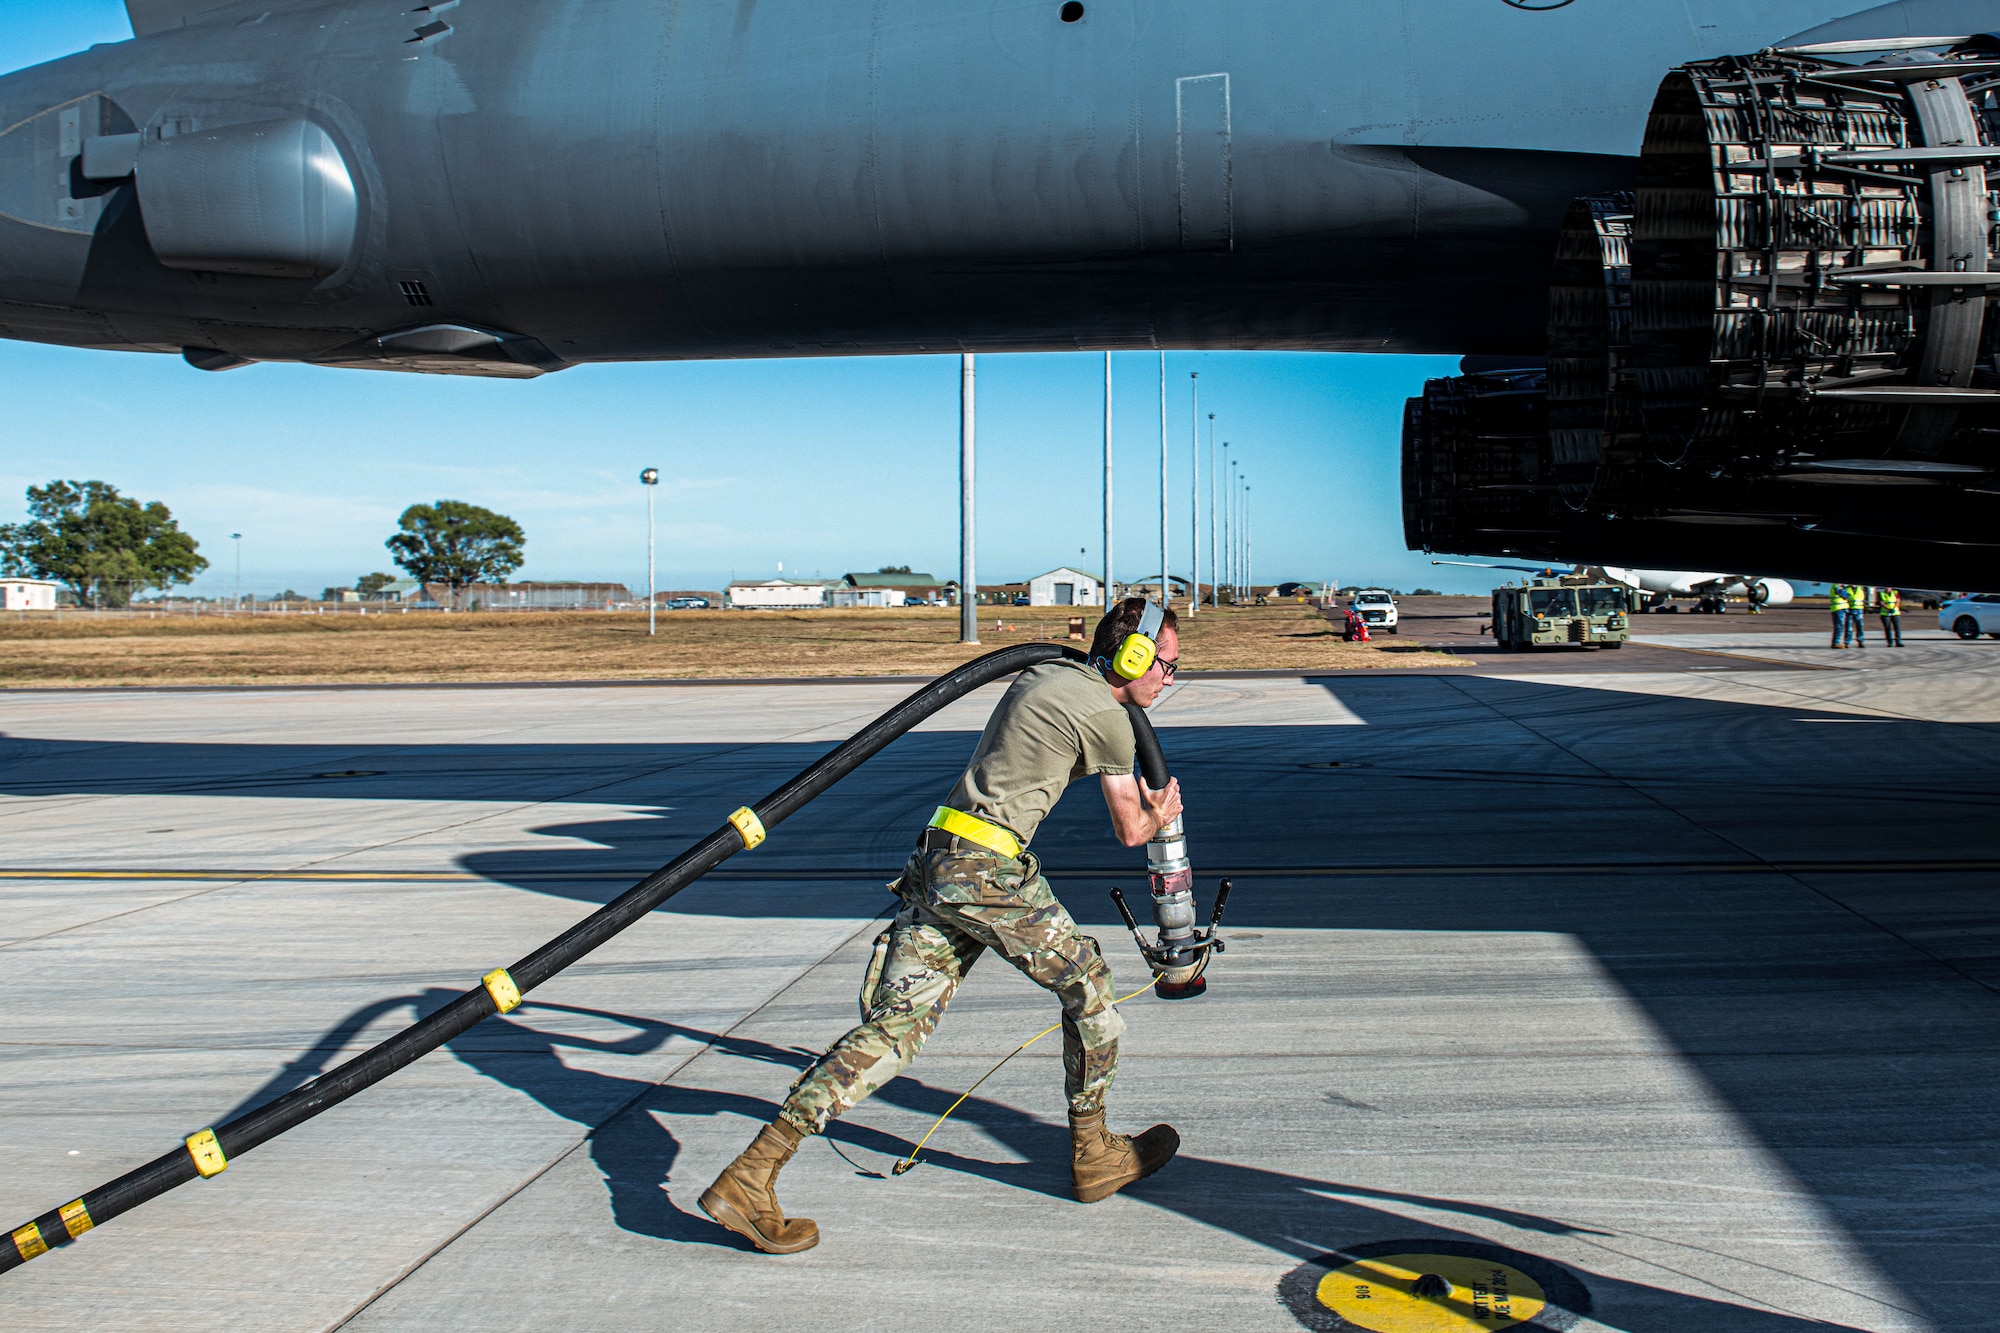 Airman 1st Class Justin Snyder, 28th Logistics Readiness Squadron fuels distribution operator, assigned to Ellsworth Air Force Base, South Dakota, pulls a refueling hose to a U.S. Air Force B-1B Lancer attached to the 34th Bomb Squadron during a hot pit refueling at RAAF Base Darwin, NT, Australia, for a Bomber Task Force mission June 22, 2022.